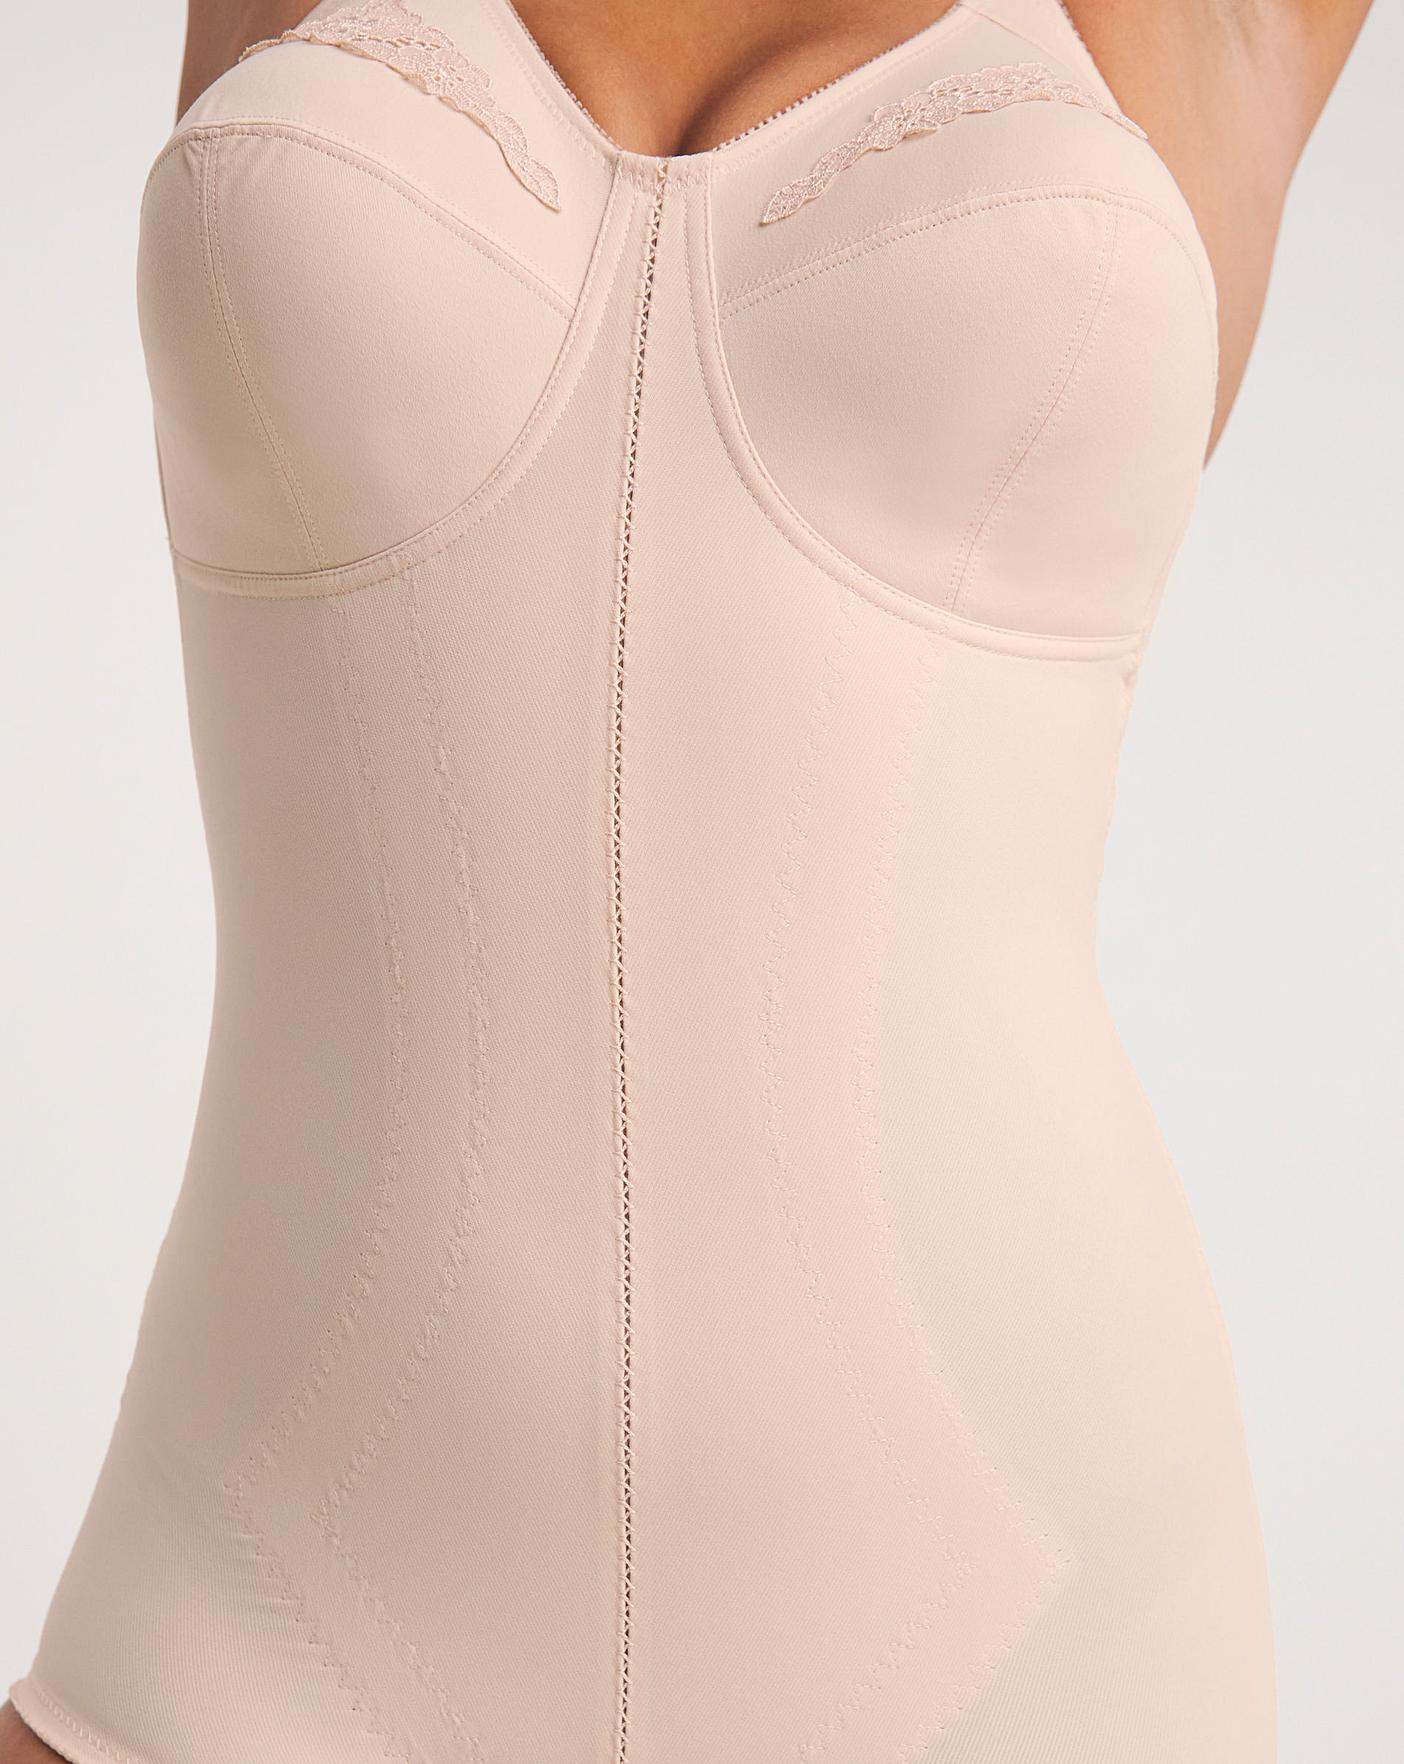 All-in-one Girdle in White – I Can’t Believe It’s A Girdle